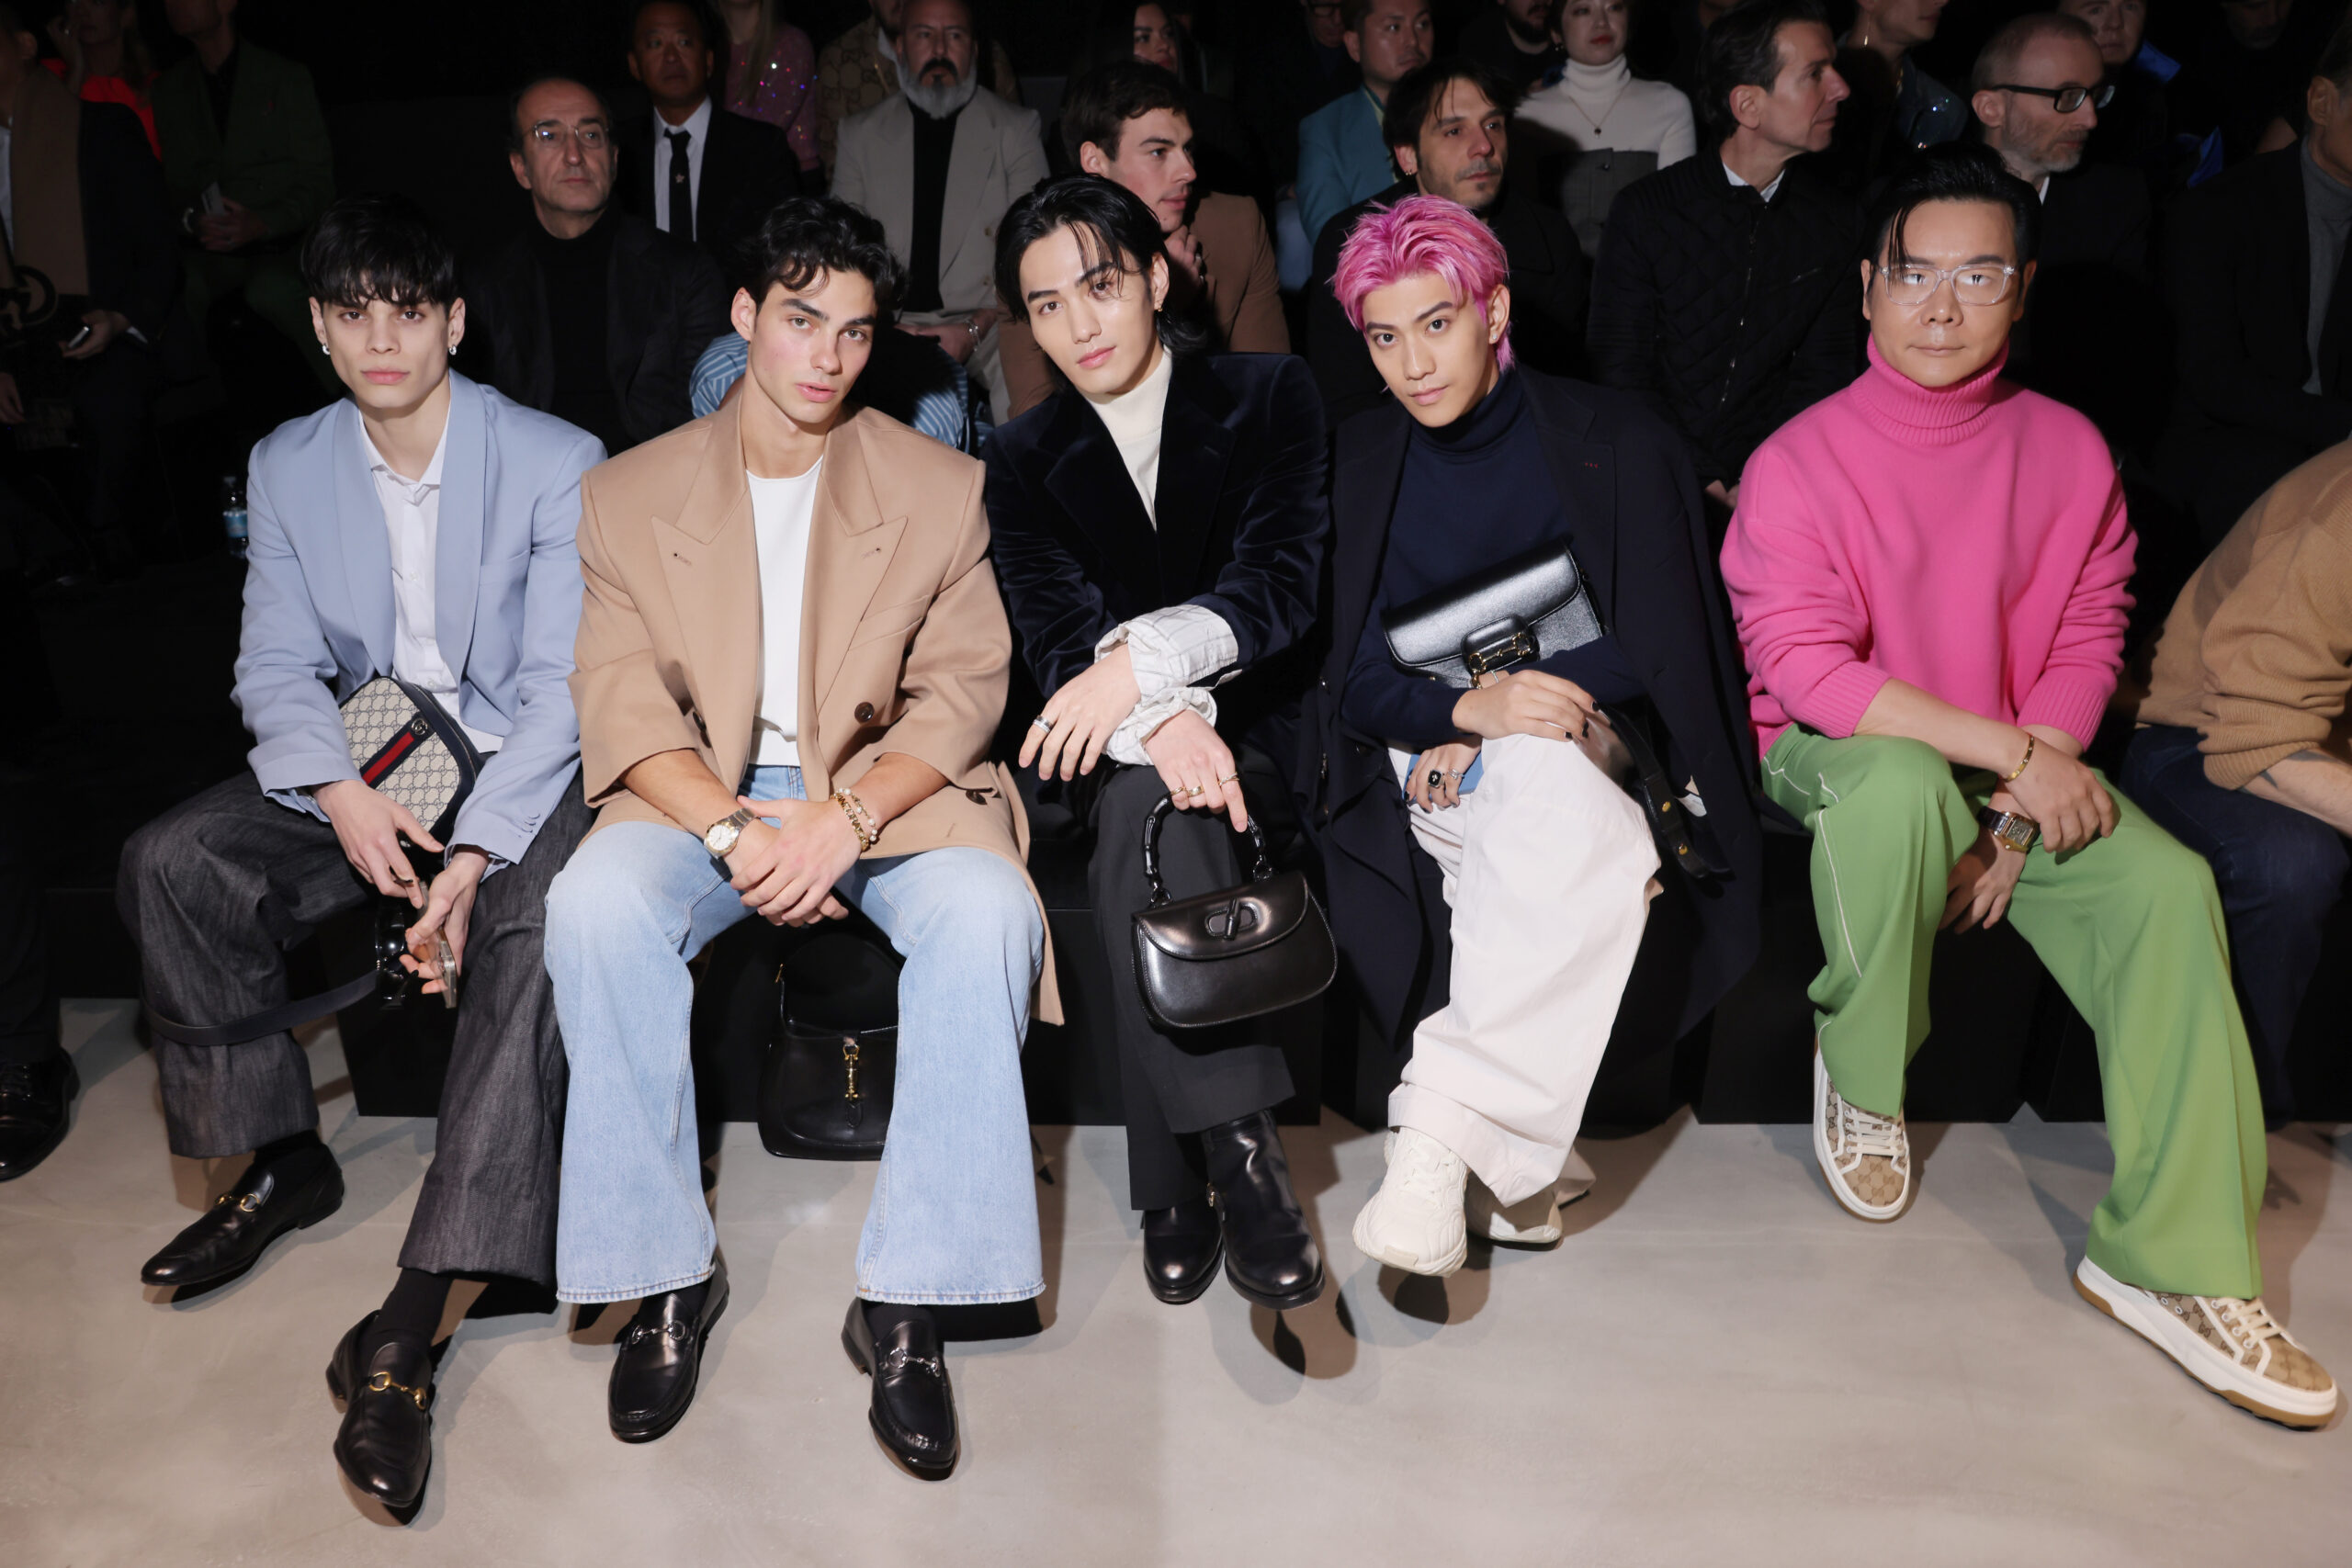 Jean Carlo Leon Espinel, Jacob Rott, Shuzo Ohira, Yamato and a guest attends the Gucci Ancora Fashion Show during Milan Fashion Week